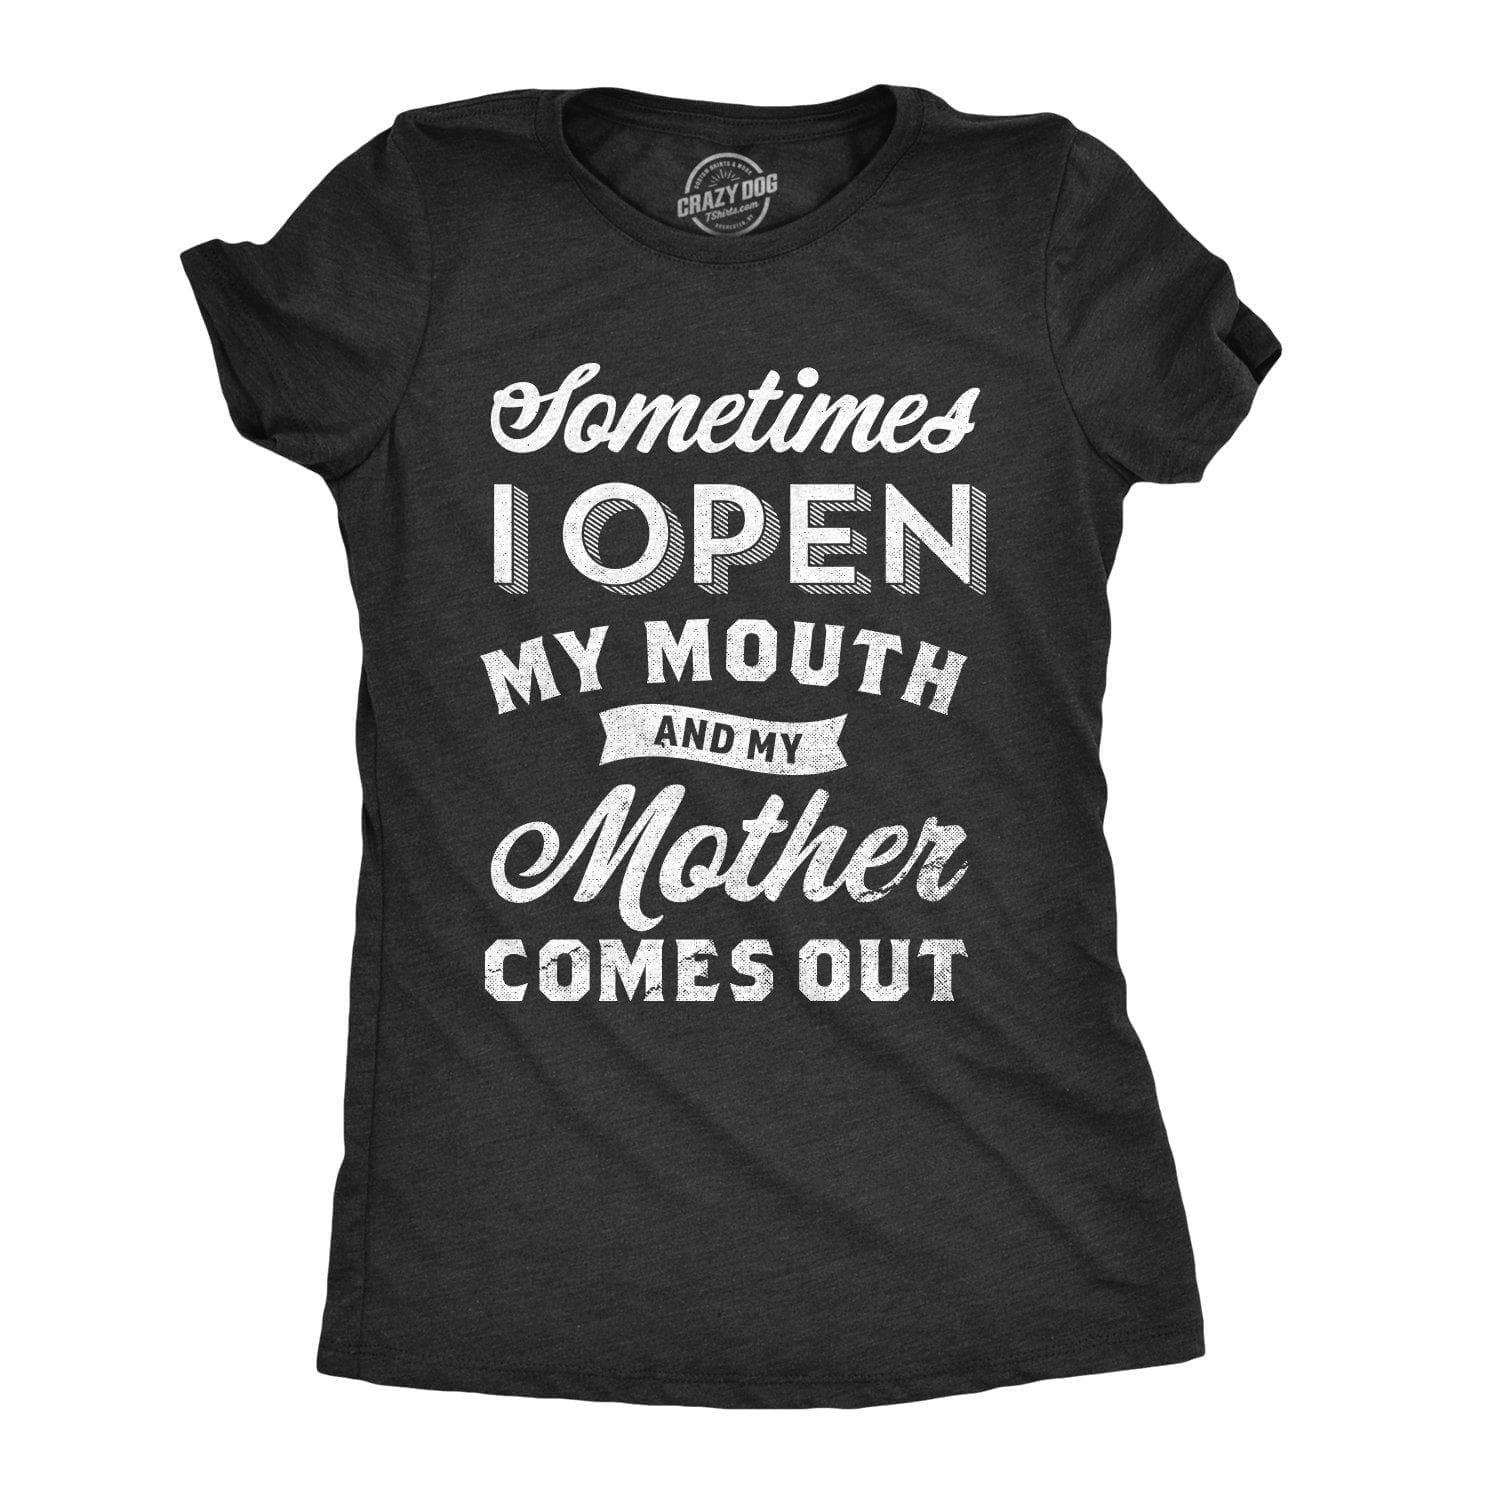 Sometimes I Open My Mouth And My Mother Comes Out Women's Tshirt  -  Crazy Dog T-Shirts